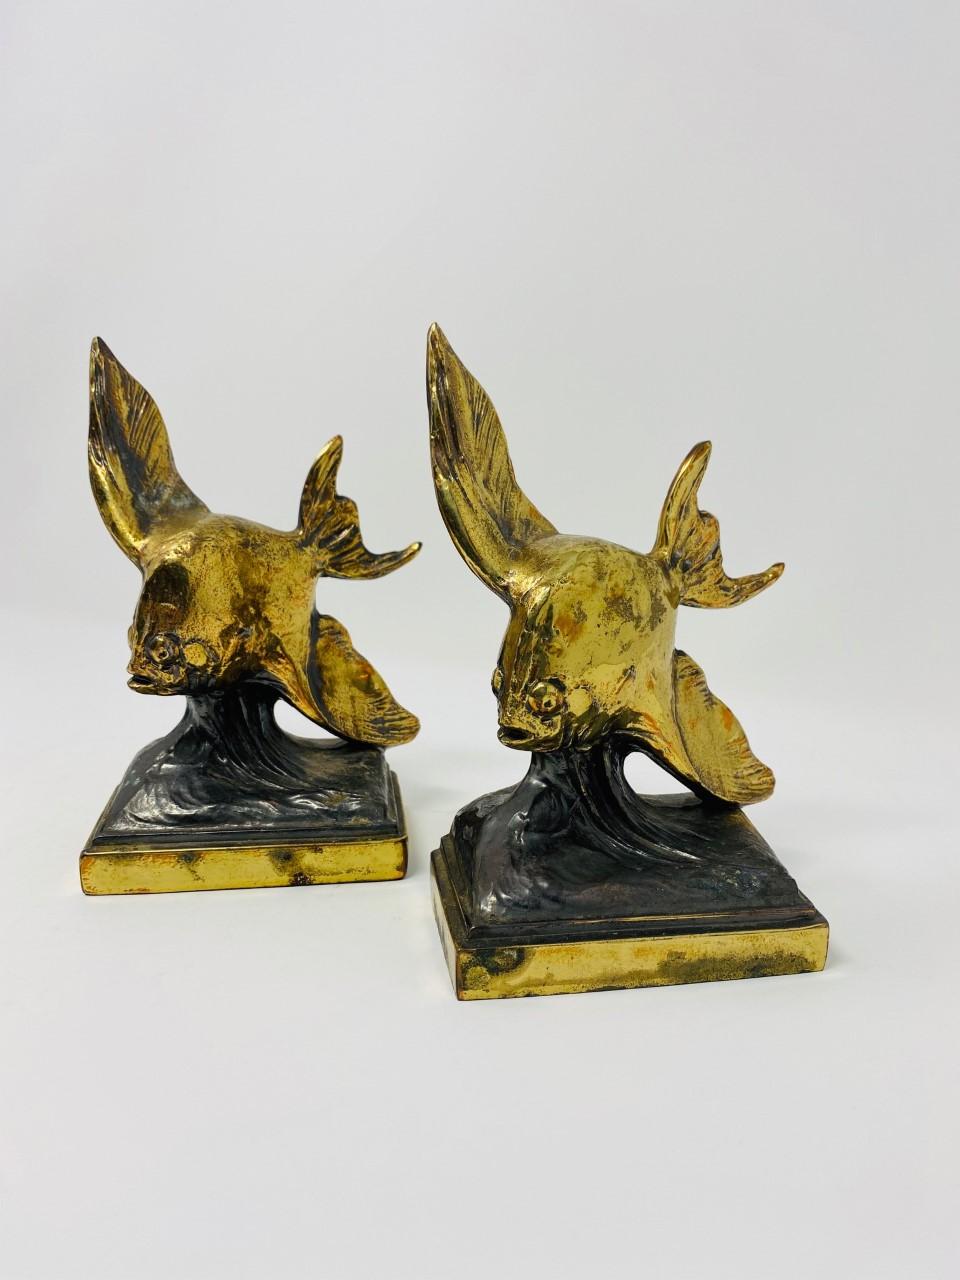 Vintage Rare Pair of Brass Flying Fish Bookends, 1930s For Sale 5